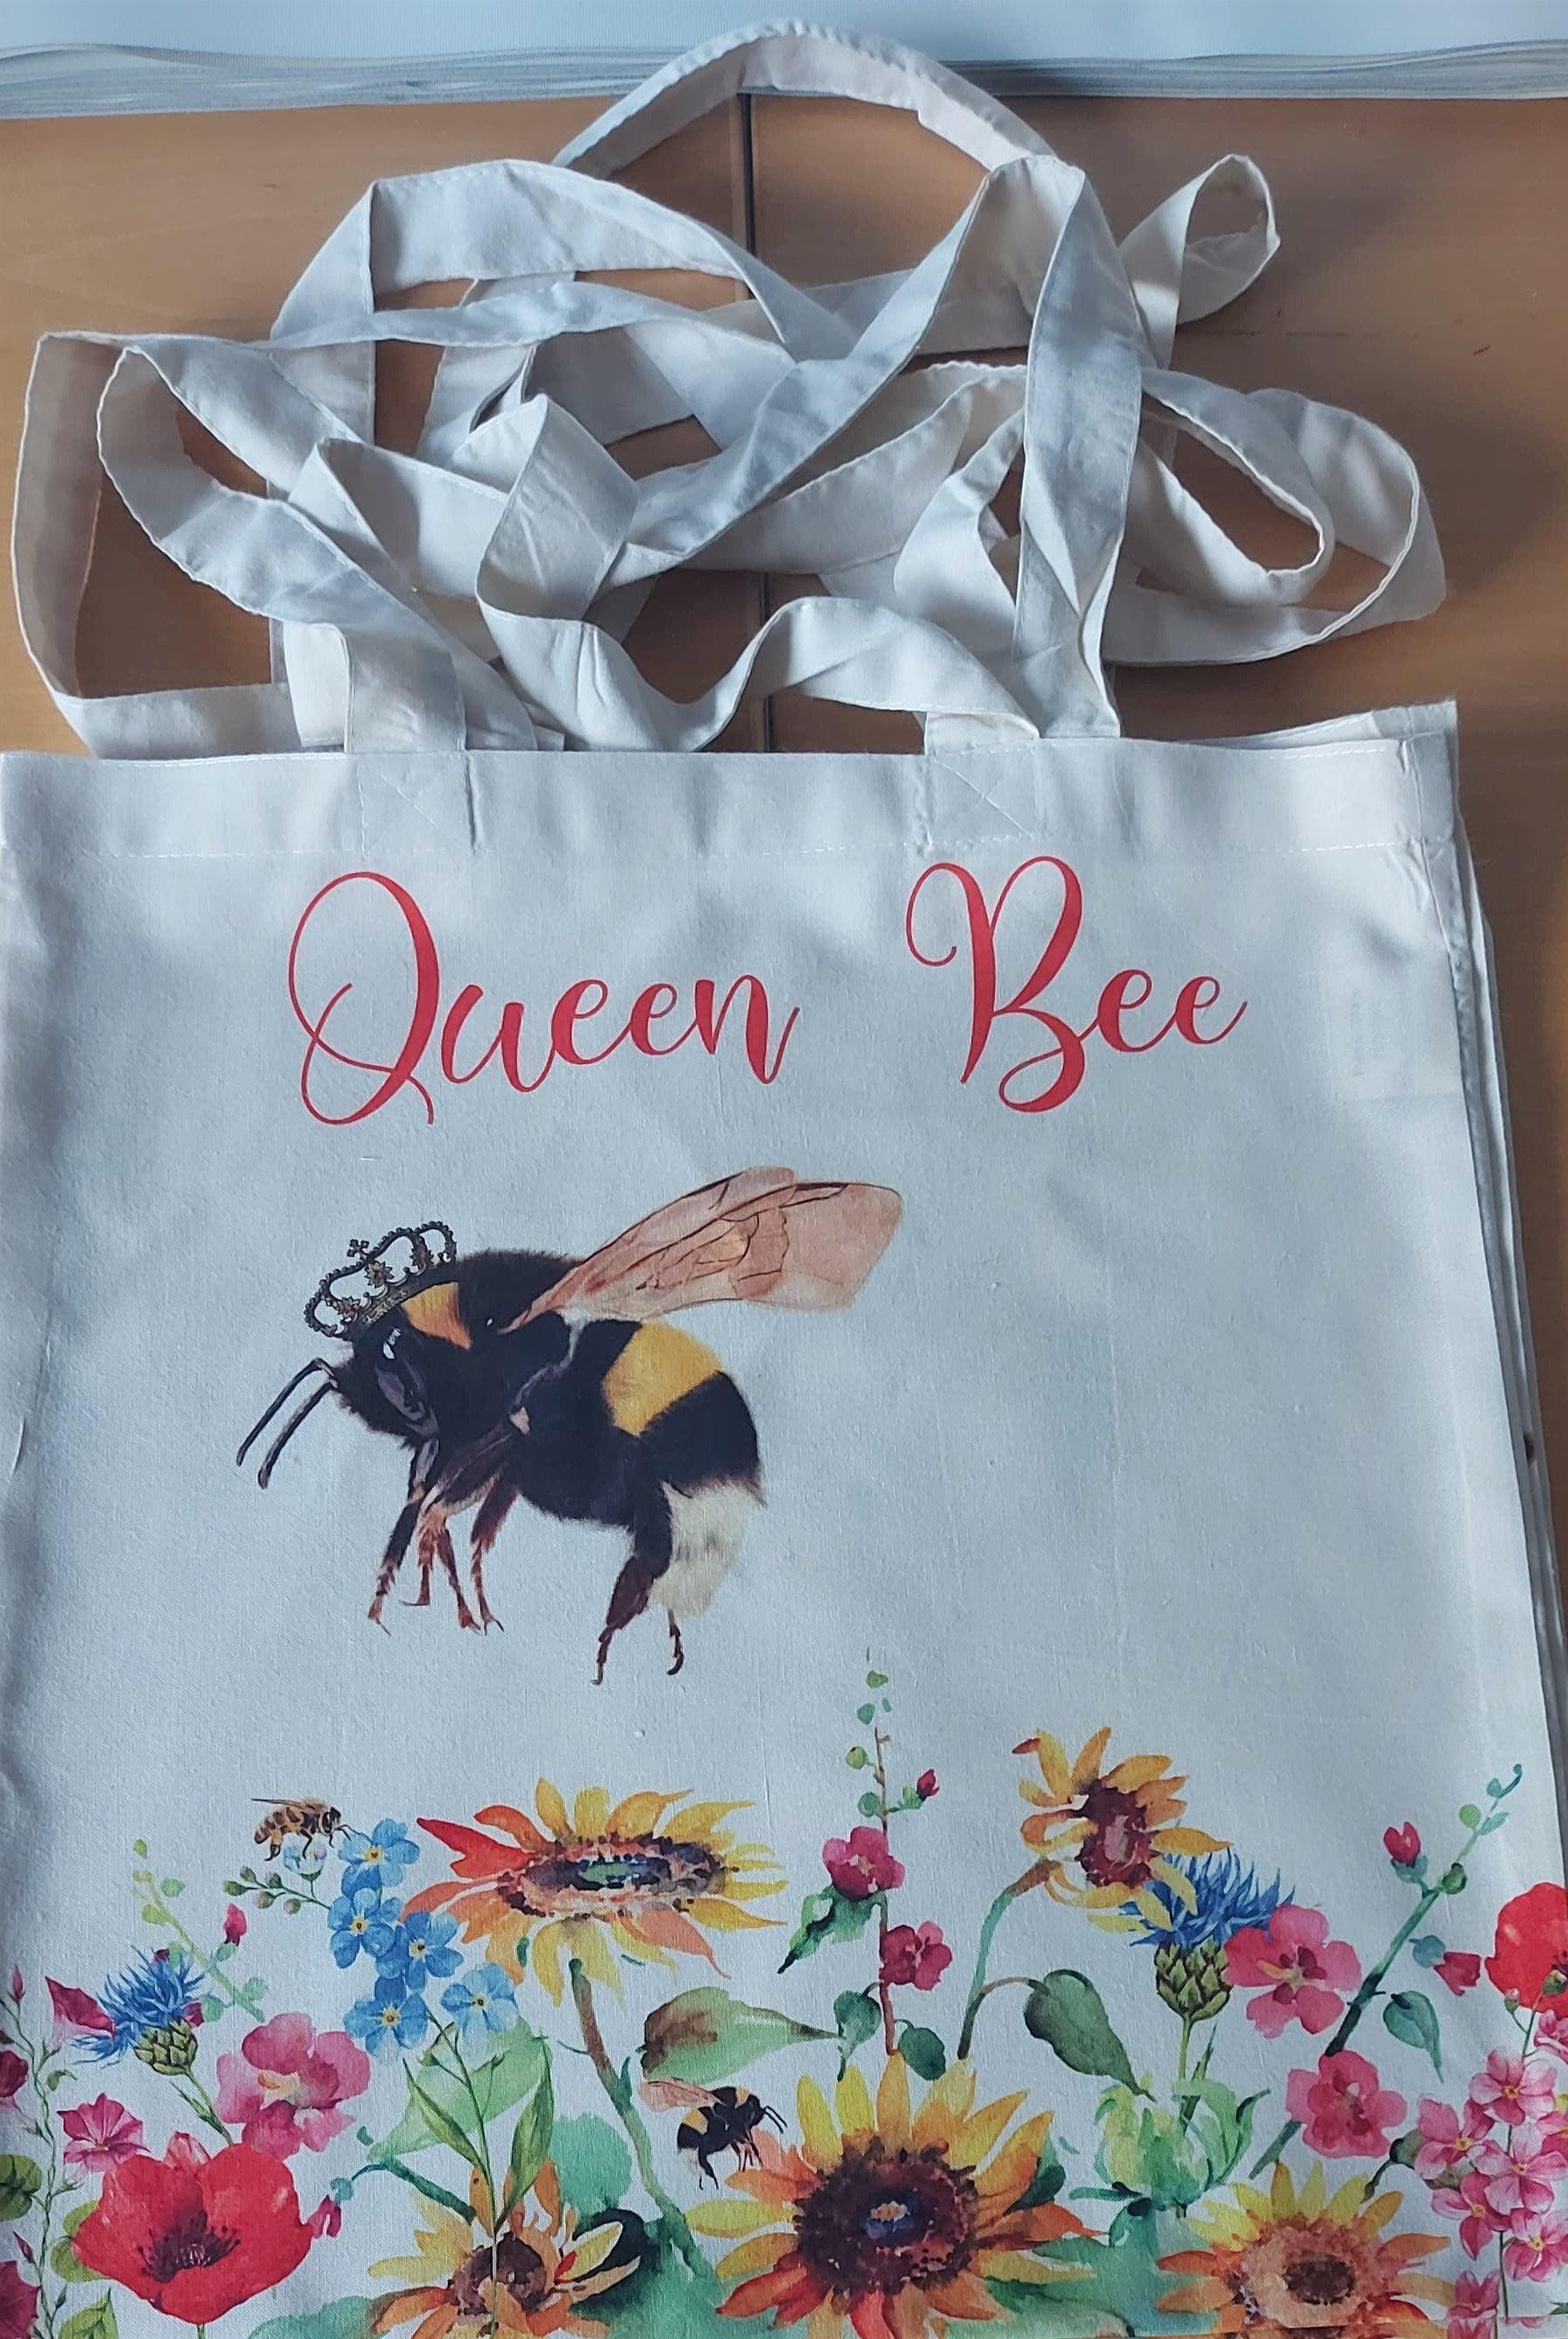 MOTHER'S DAY GIFT- Queen Bee re useable Eco shopper bag-Beautiful queen bee design- Perfect Gift Reuseable shopping bags-Eco Bags